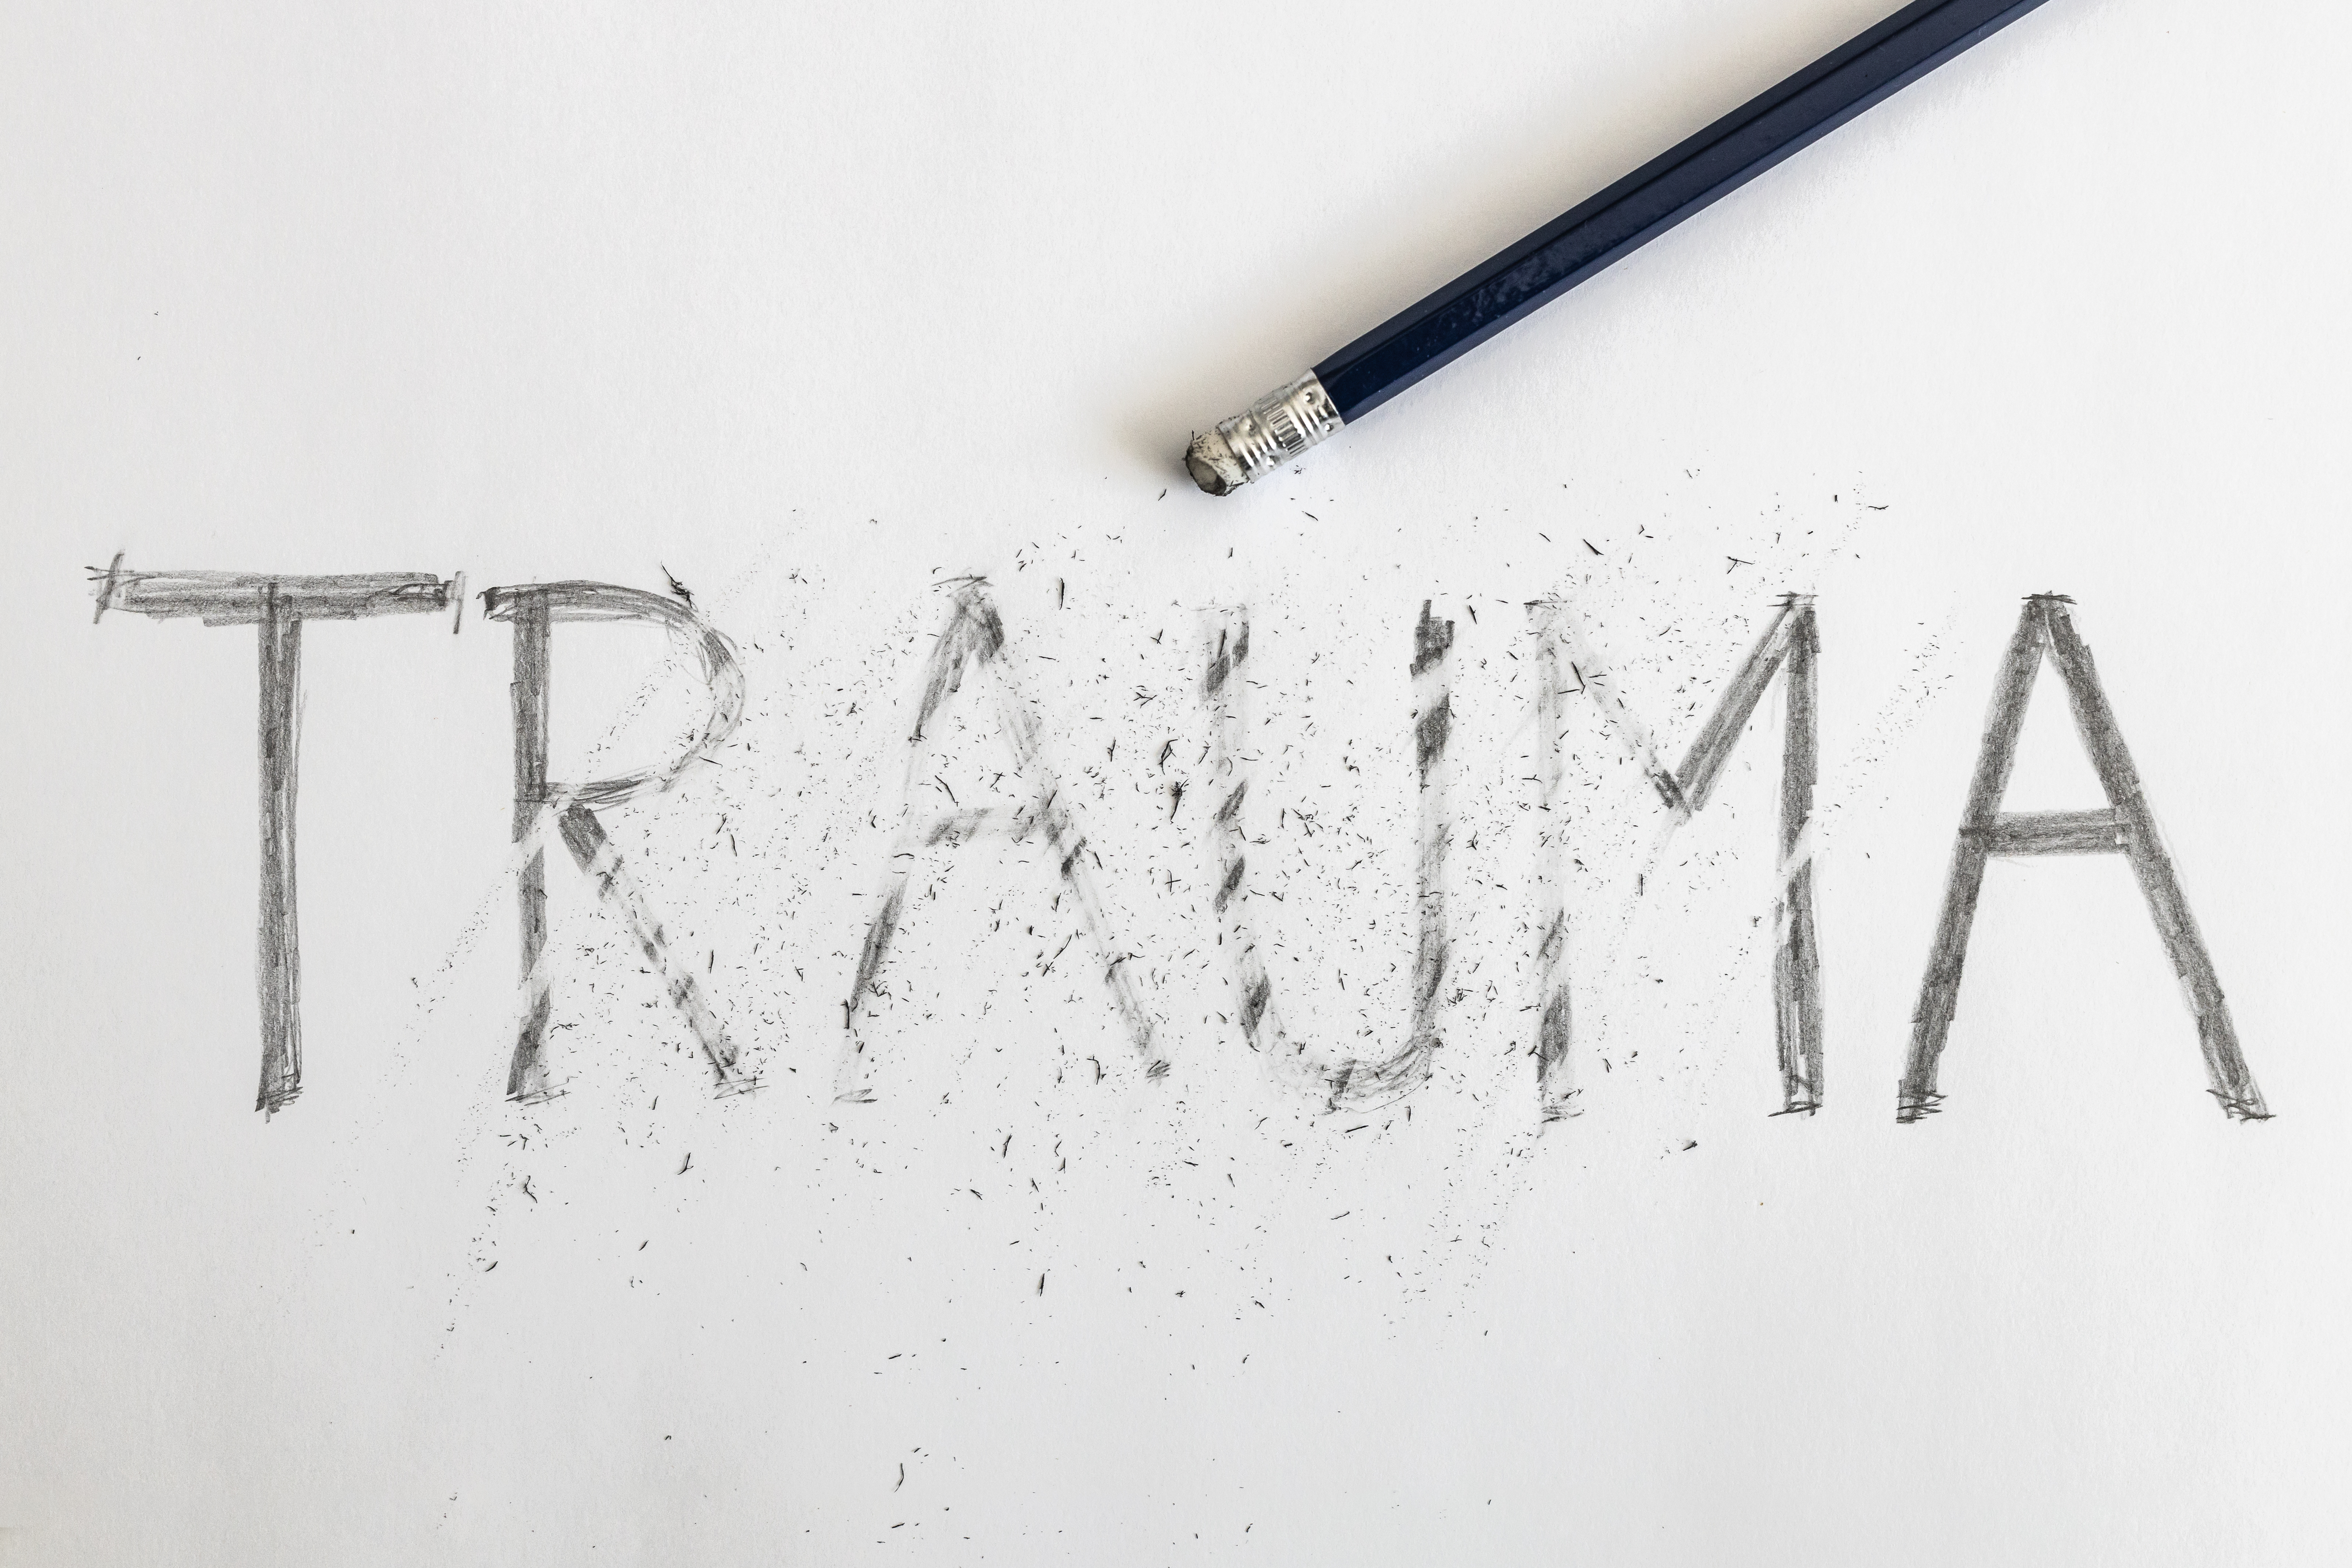 The word trauma written in pencil, with some of it rubbed out